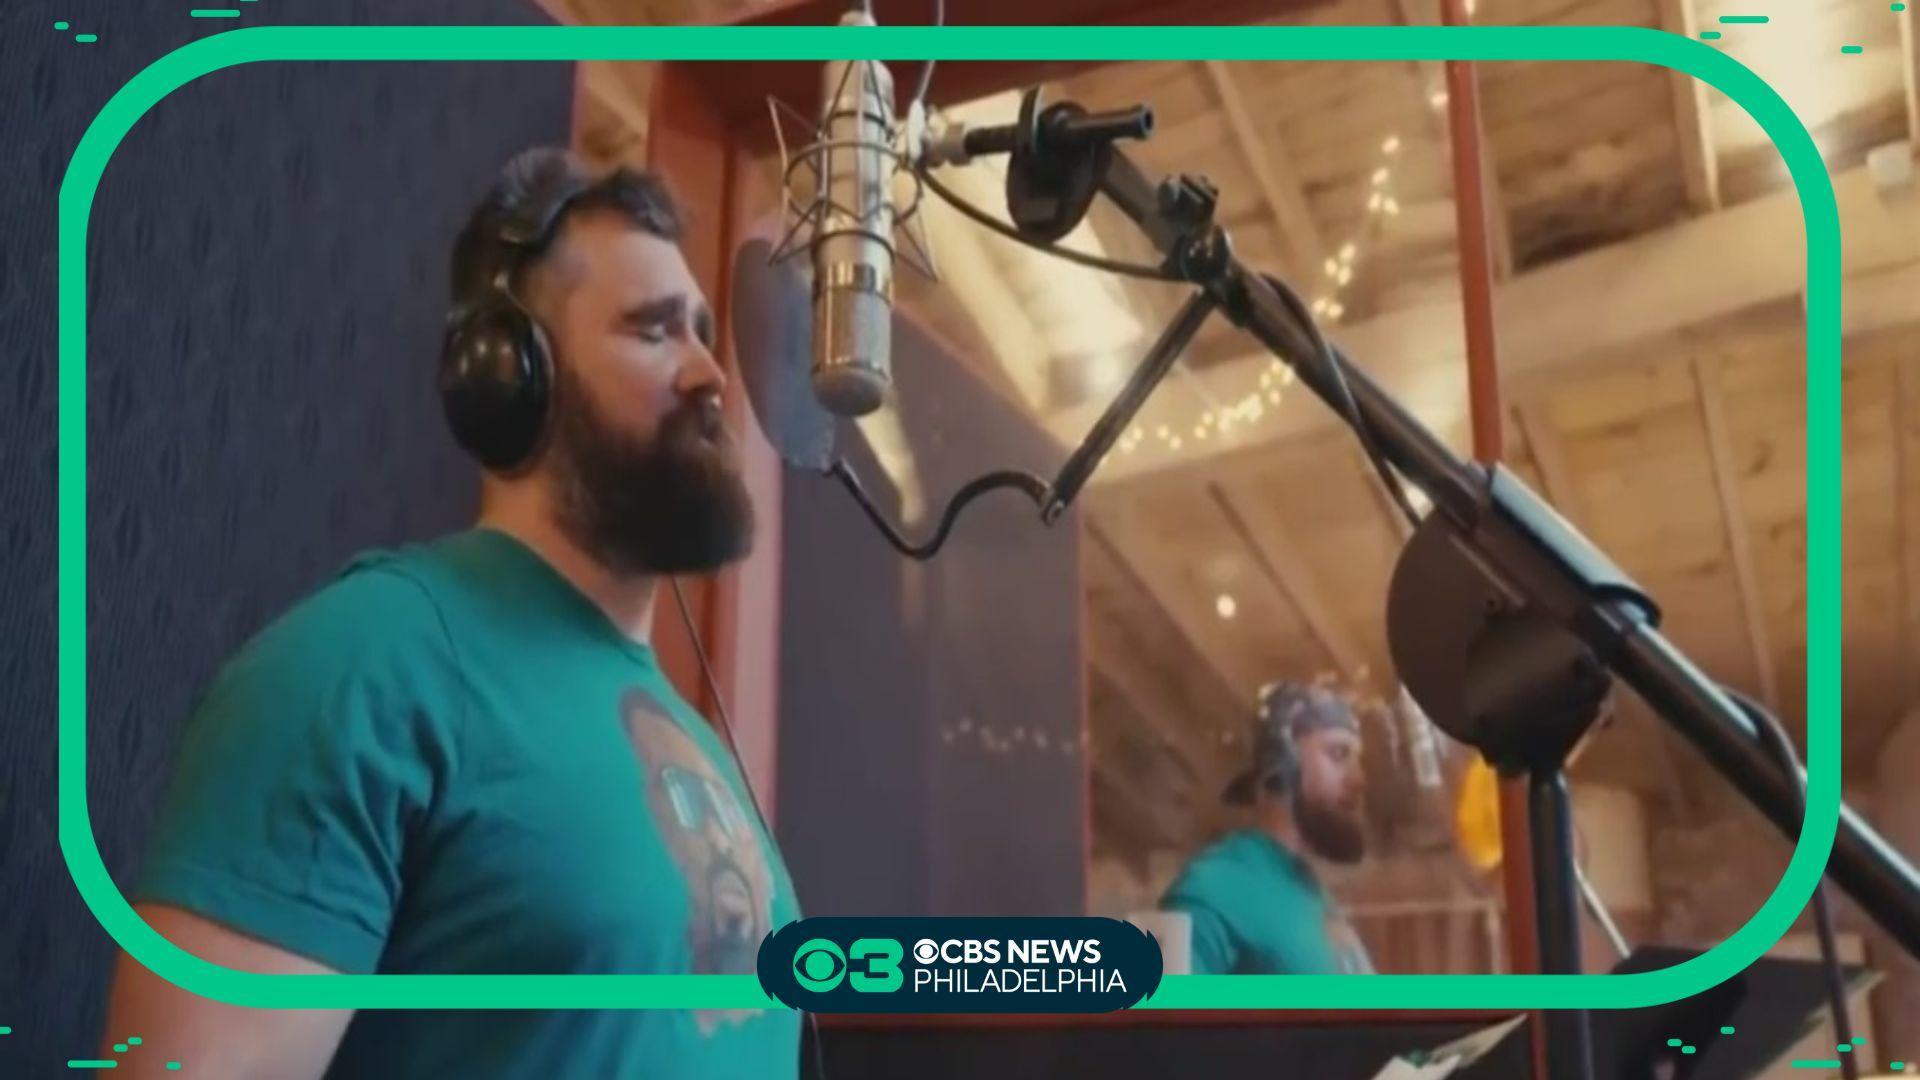 A Philly Special Christmas': What to know about Eagles, Jason Kelce's Christmas  album